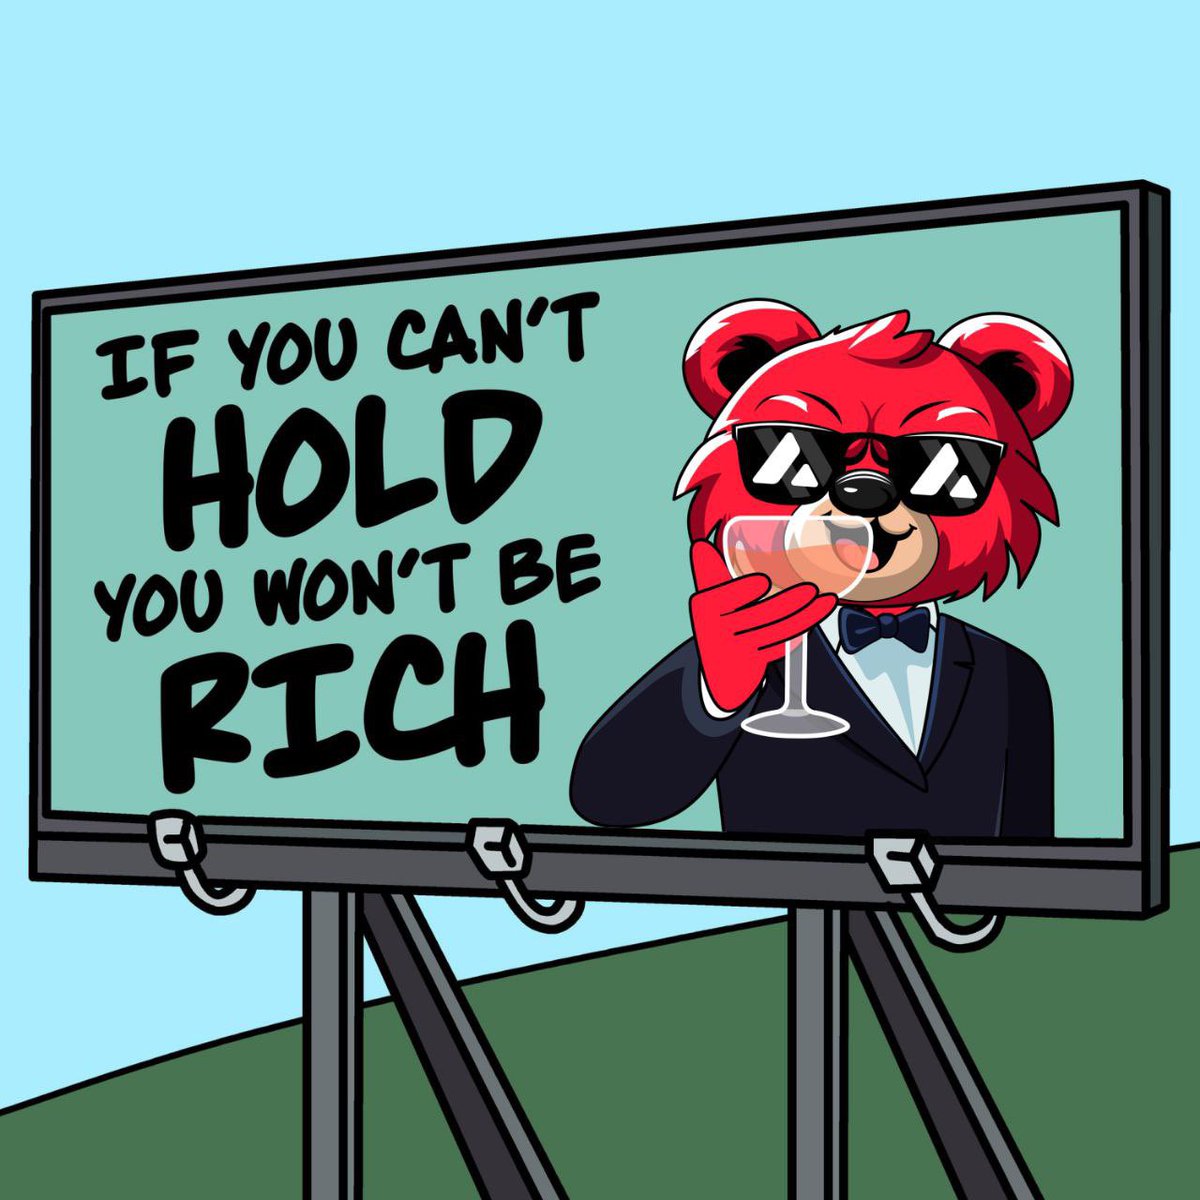 Hey, there's only one way to become a millionaire this bullrun: HODL your way to the top! 🔥 The difference between 10x and 100x gains? Just a few days of nail-biting, meme-sharing, and diamond hands. So be patient, DCA, and get ready for the moon ride! 🌏🚀🌚 #BigRed $TD $AVAX